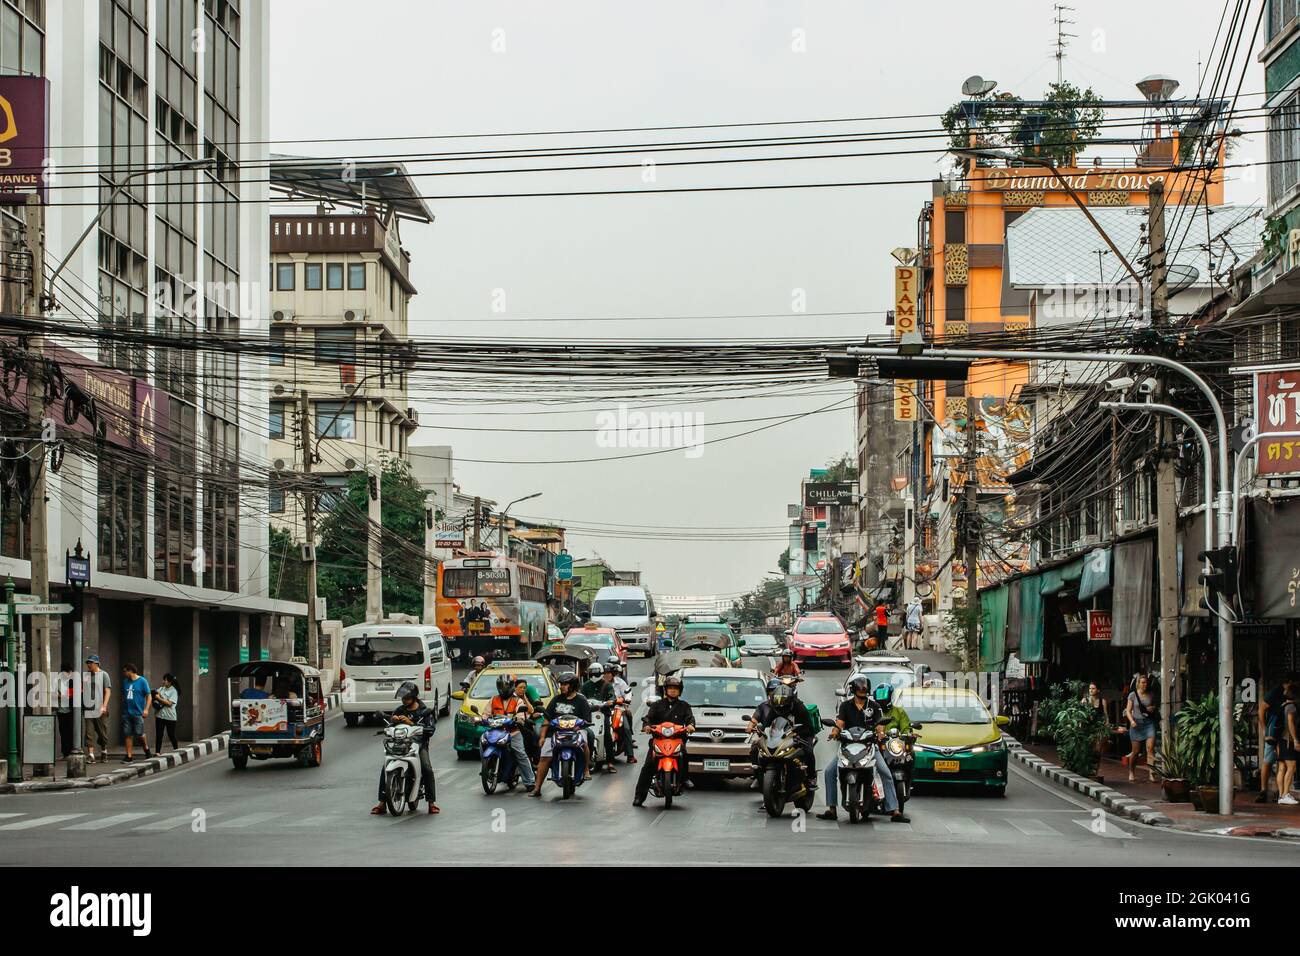 Bangkok, Thailand - January 17,2020.Busy street in Chinatown,junction with cars,buses,motorbikes,people.Morning traffic.Thai crowded transportation Stock Photo